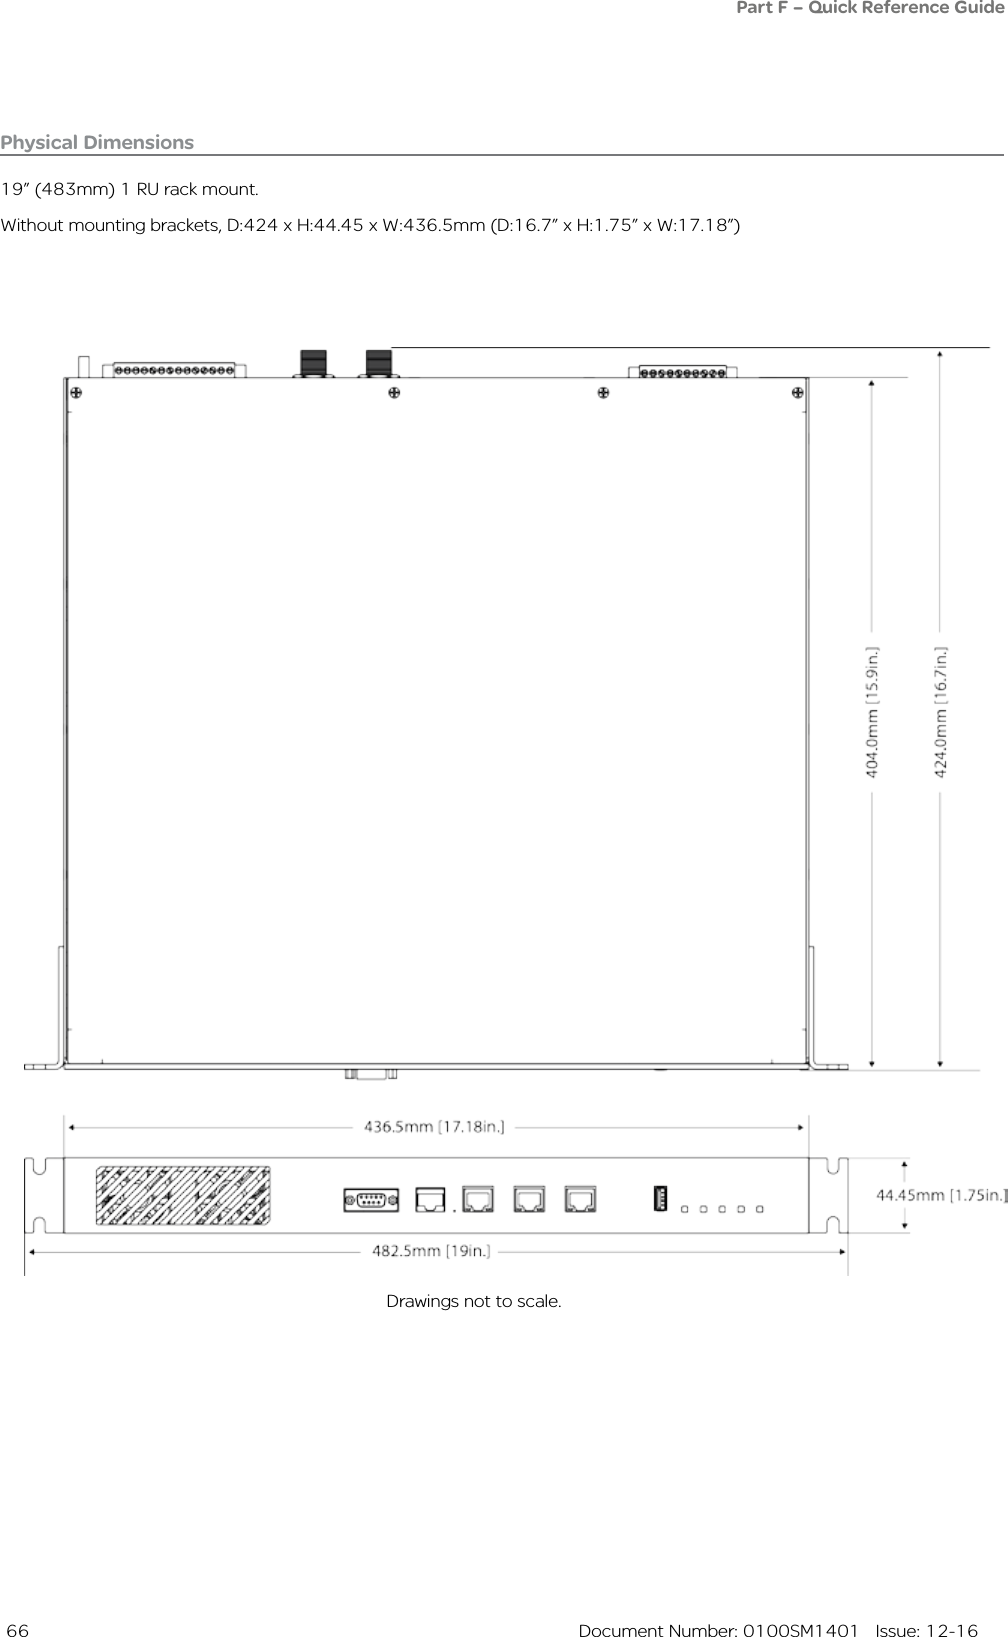  66  Document Number: 0100SM1401   Issue: 12-16Physical Dimensions19” (483mm) 1 RU rack mount.Without mounting brackets, D:424 x H:44.45 x W:436.5mm (D:16.7” x H:1.75” x W:17.18”)Drawings not to scale.Part F – Quick Reference Guide